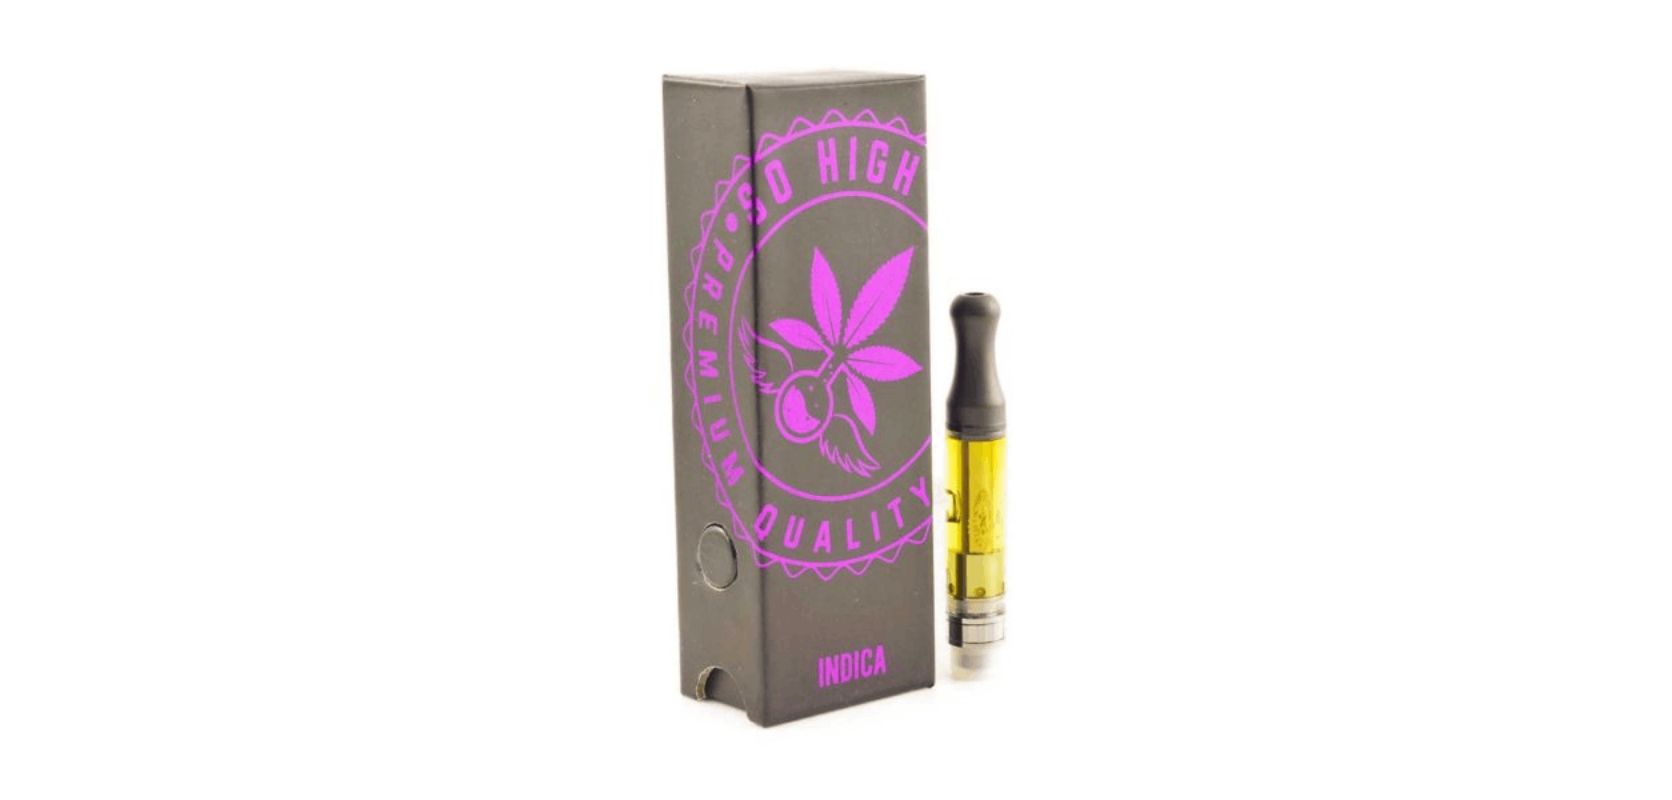 This vape features the Indica-leaning Bubba Kush, a strain well known for its sleep-inducing and anxiety-relieving effects. 